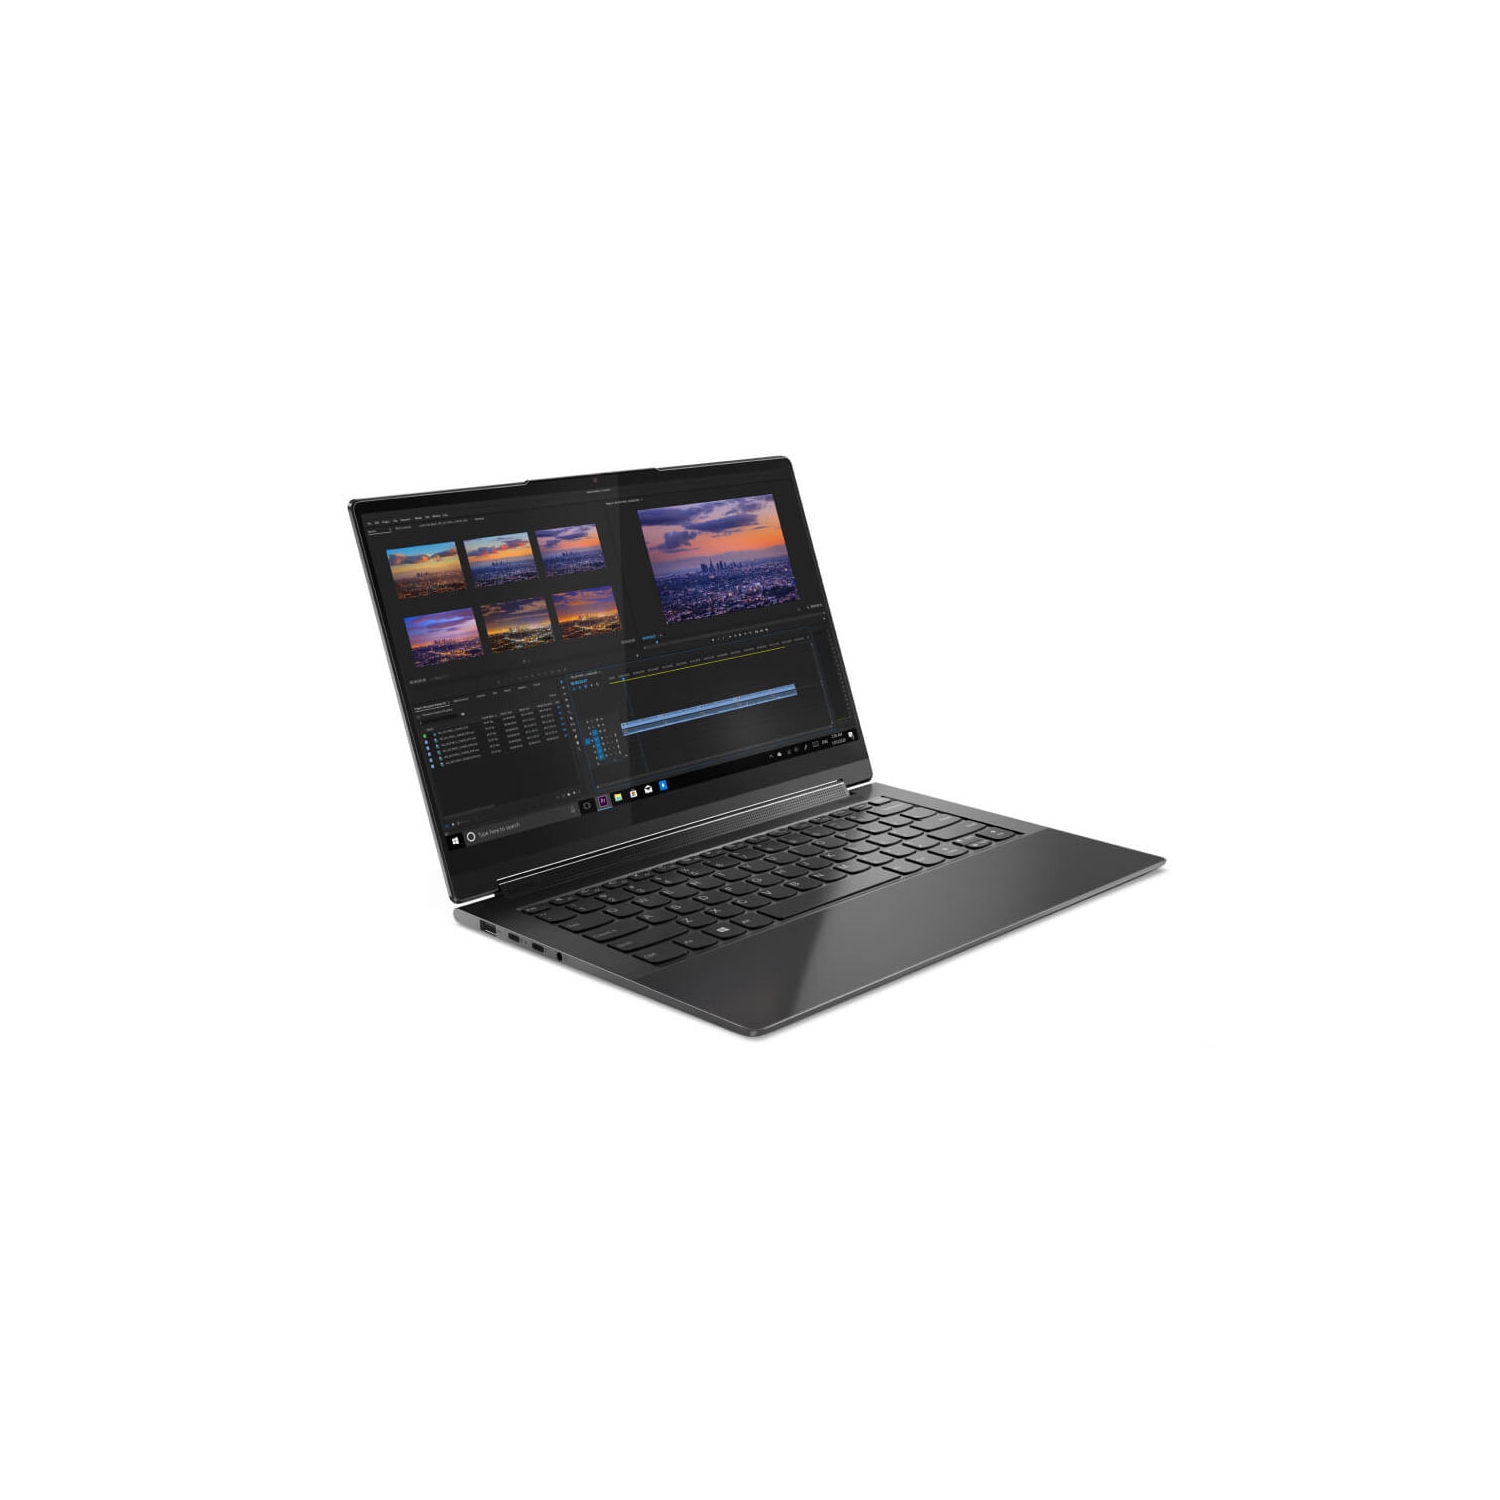 Refurbish Excellent) - Lenovo Yoga 9 2 in 1 touchscreen convertible tablet - 14ITL5 - Core i7-1185G7 - 8GB RAM - 512GB SSD - Windows 11 Pro - 1 Year Warranty [Like New in Box]